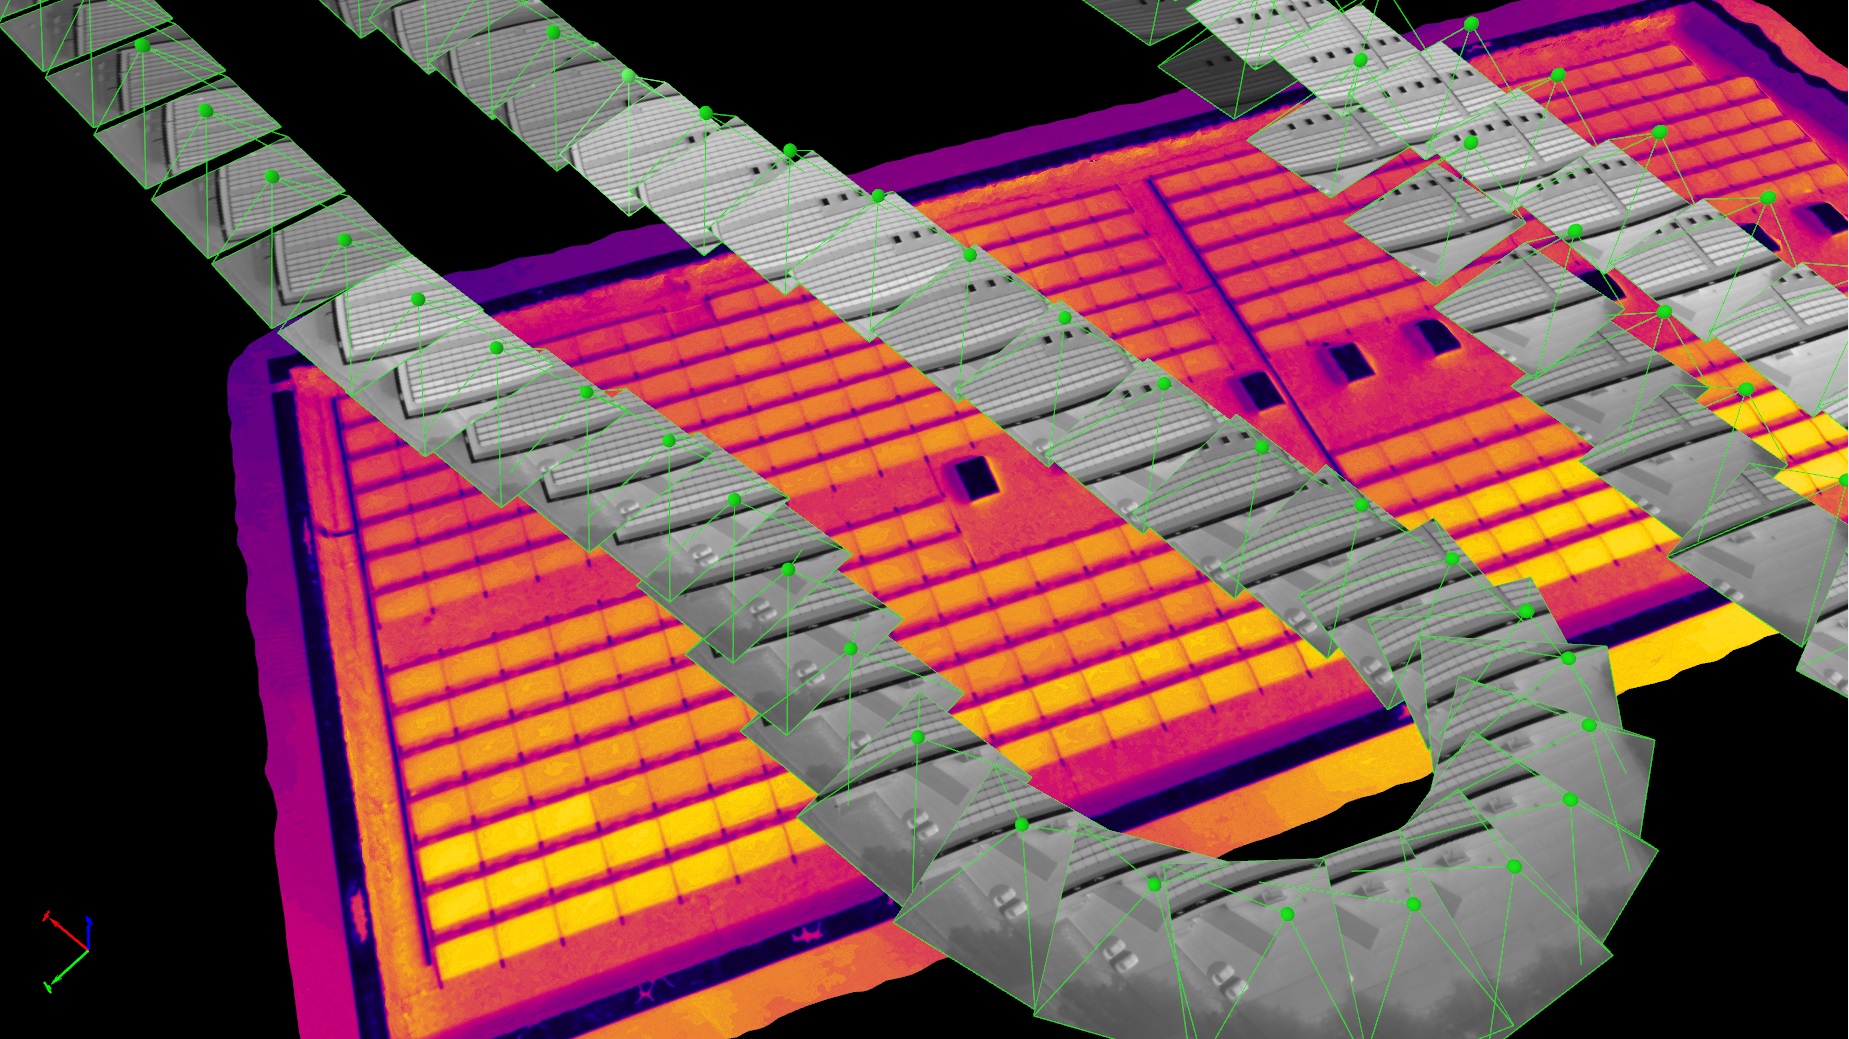 A thermal drone image of a roof, showing the location of each image captured.